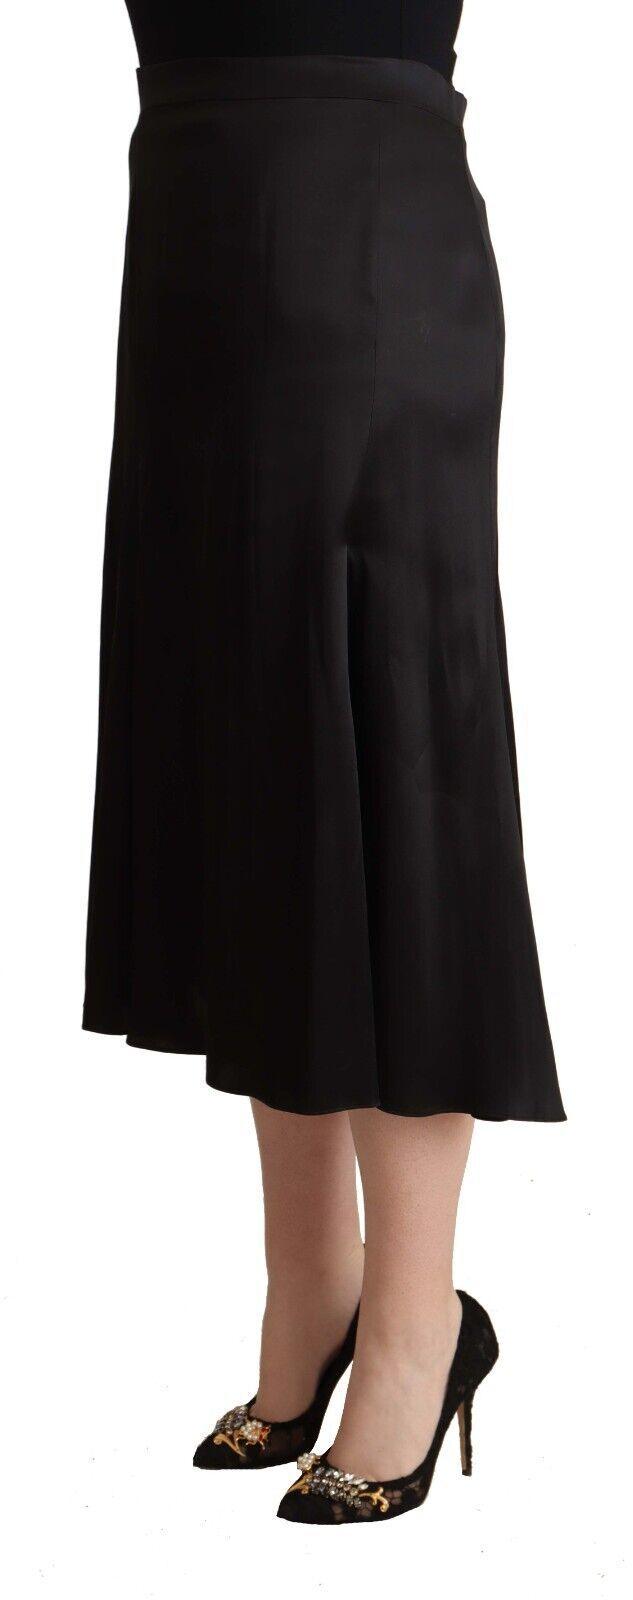 Blumarine Black Acetate High Waist A-line Midi Skirt - Designed by Blumarine Available to Buy at a Discounted Price on Moon Behind The Hill Online Designer Discount Store